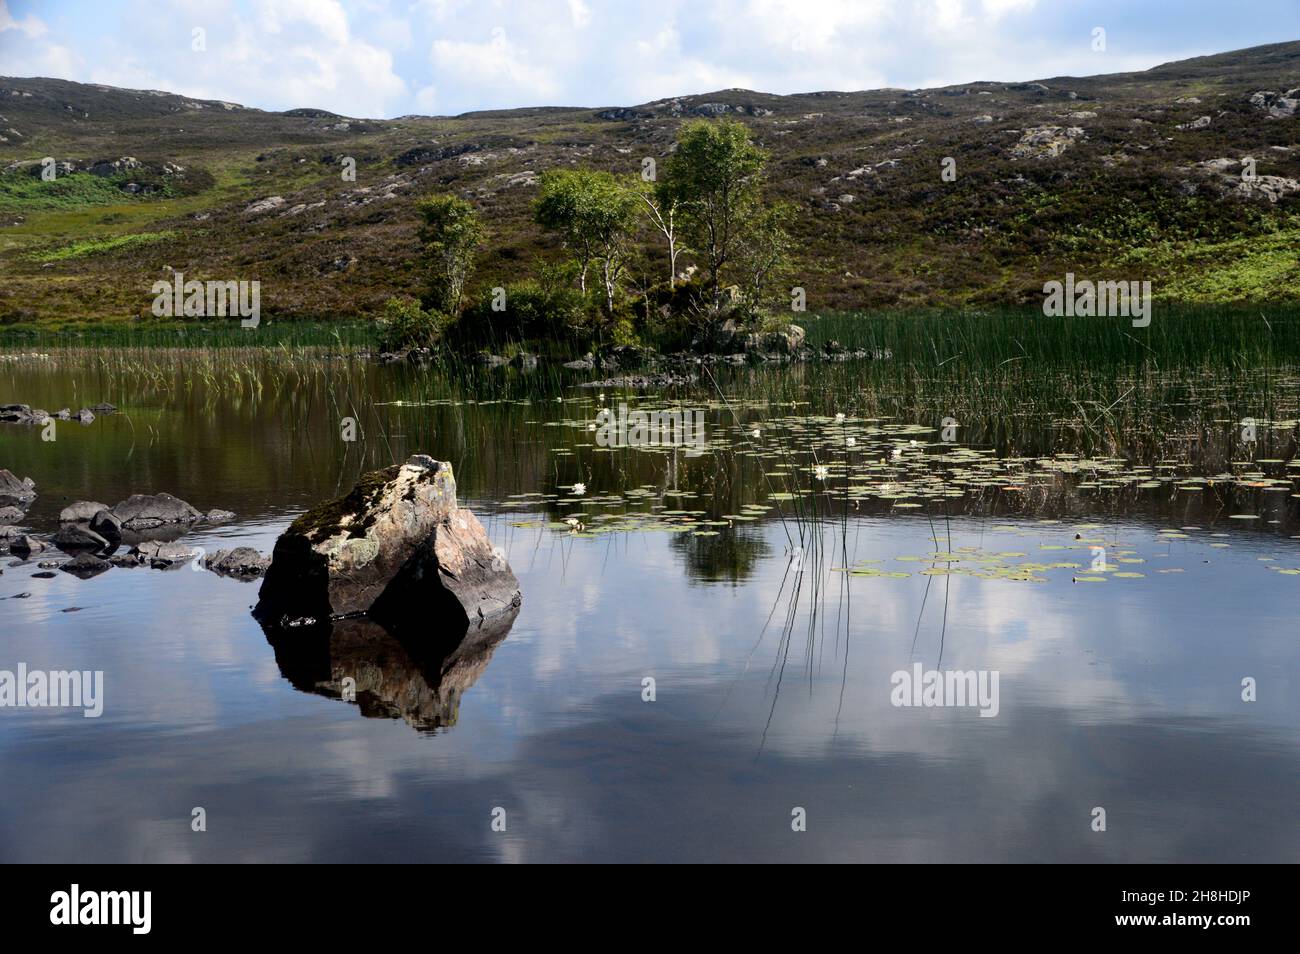 Reflections in Dock Tarn near the Summit of the Wainwright 'Grange Fell' in Borrowdale, Lake District National Park, Cumbria, England, UK. Stock Photo